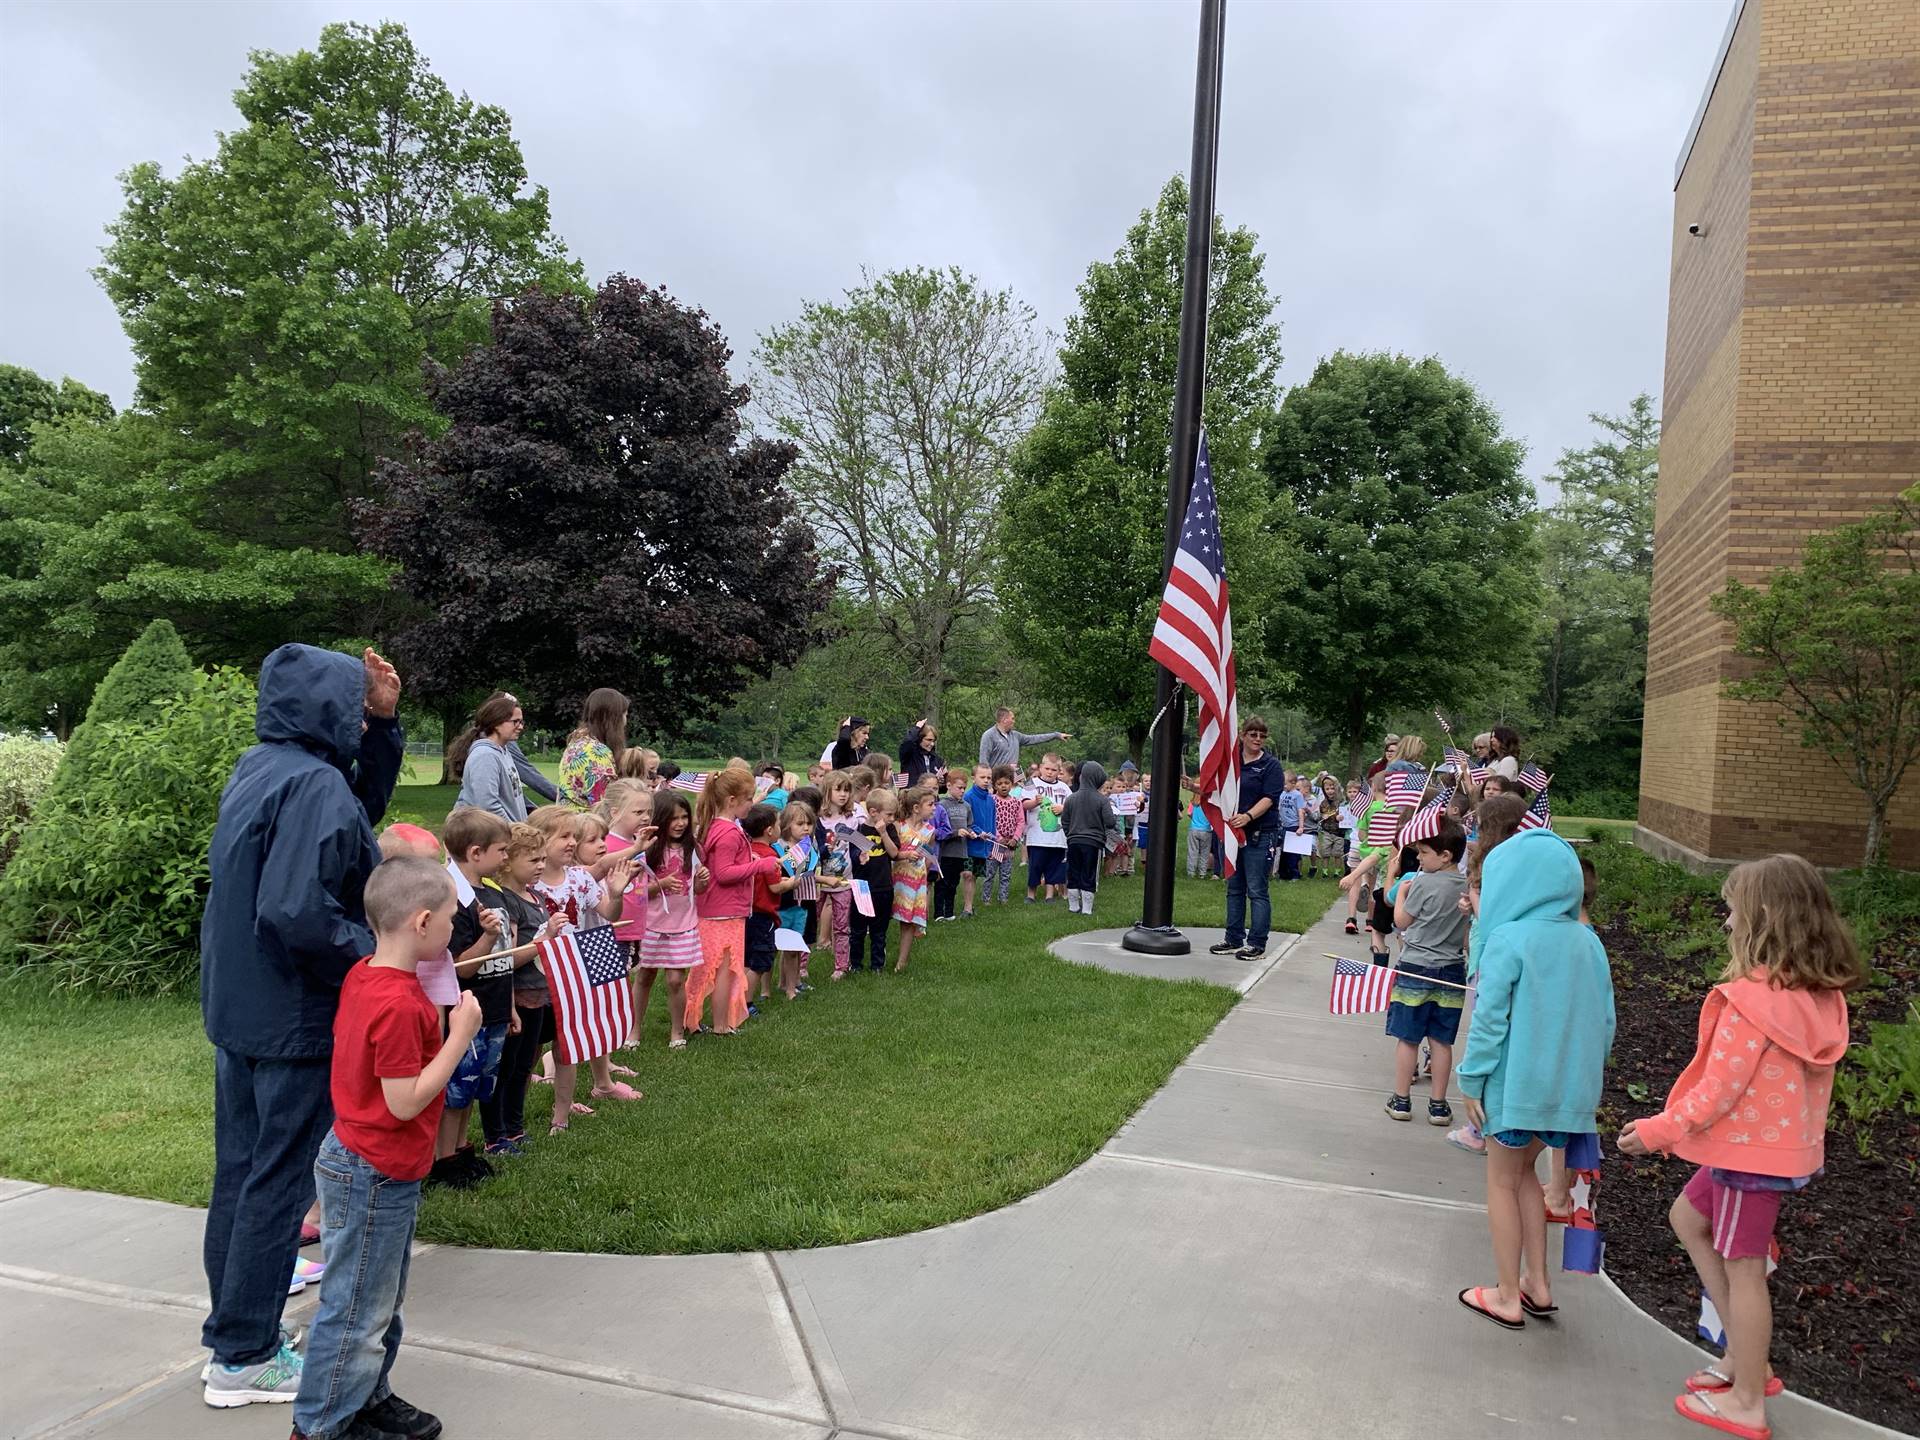 Students and staff around the flag pole.